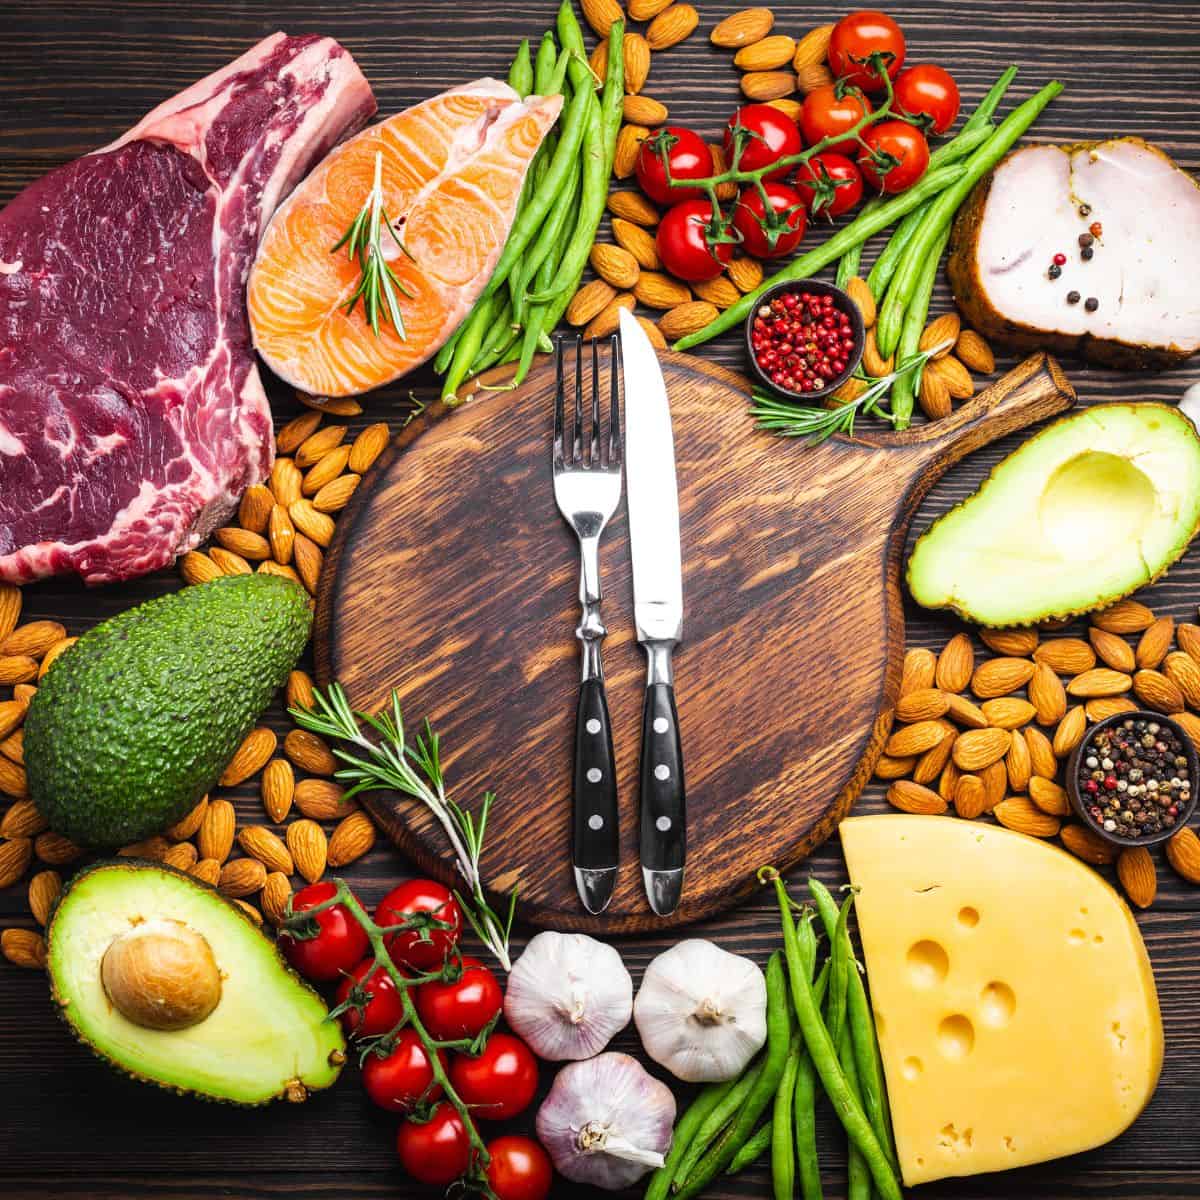 Knife and fork with black handle sitting on a wooden cutting board surrounded by cheese, garlic, avocado, steak, salmon, tomatoes, green beans, and spices.